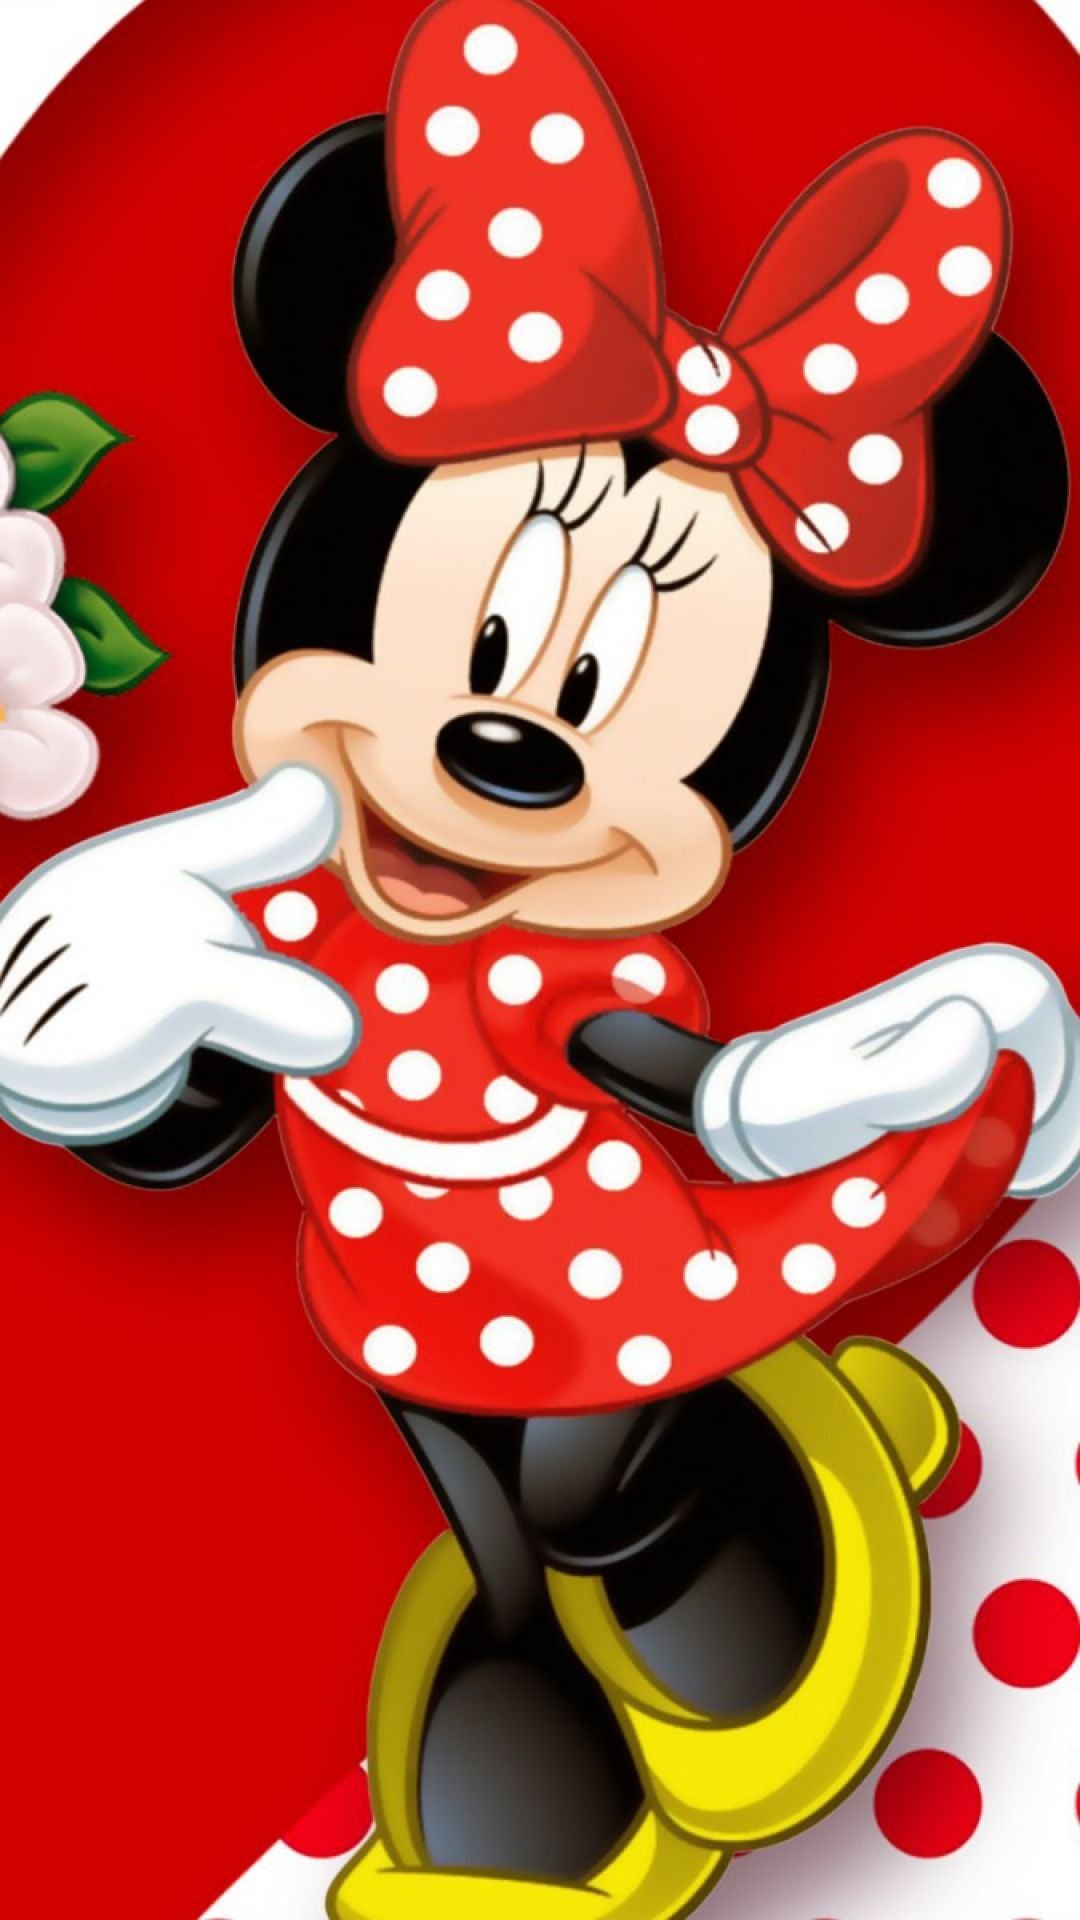 Minnie Mouse Wallpaper  Mickey mouse art Minnie mouse images Disney  wallpaper